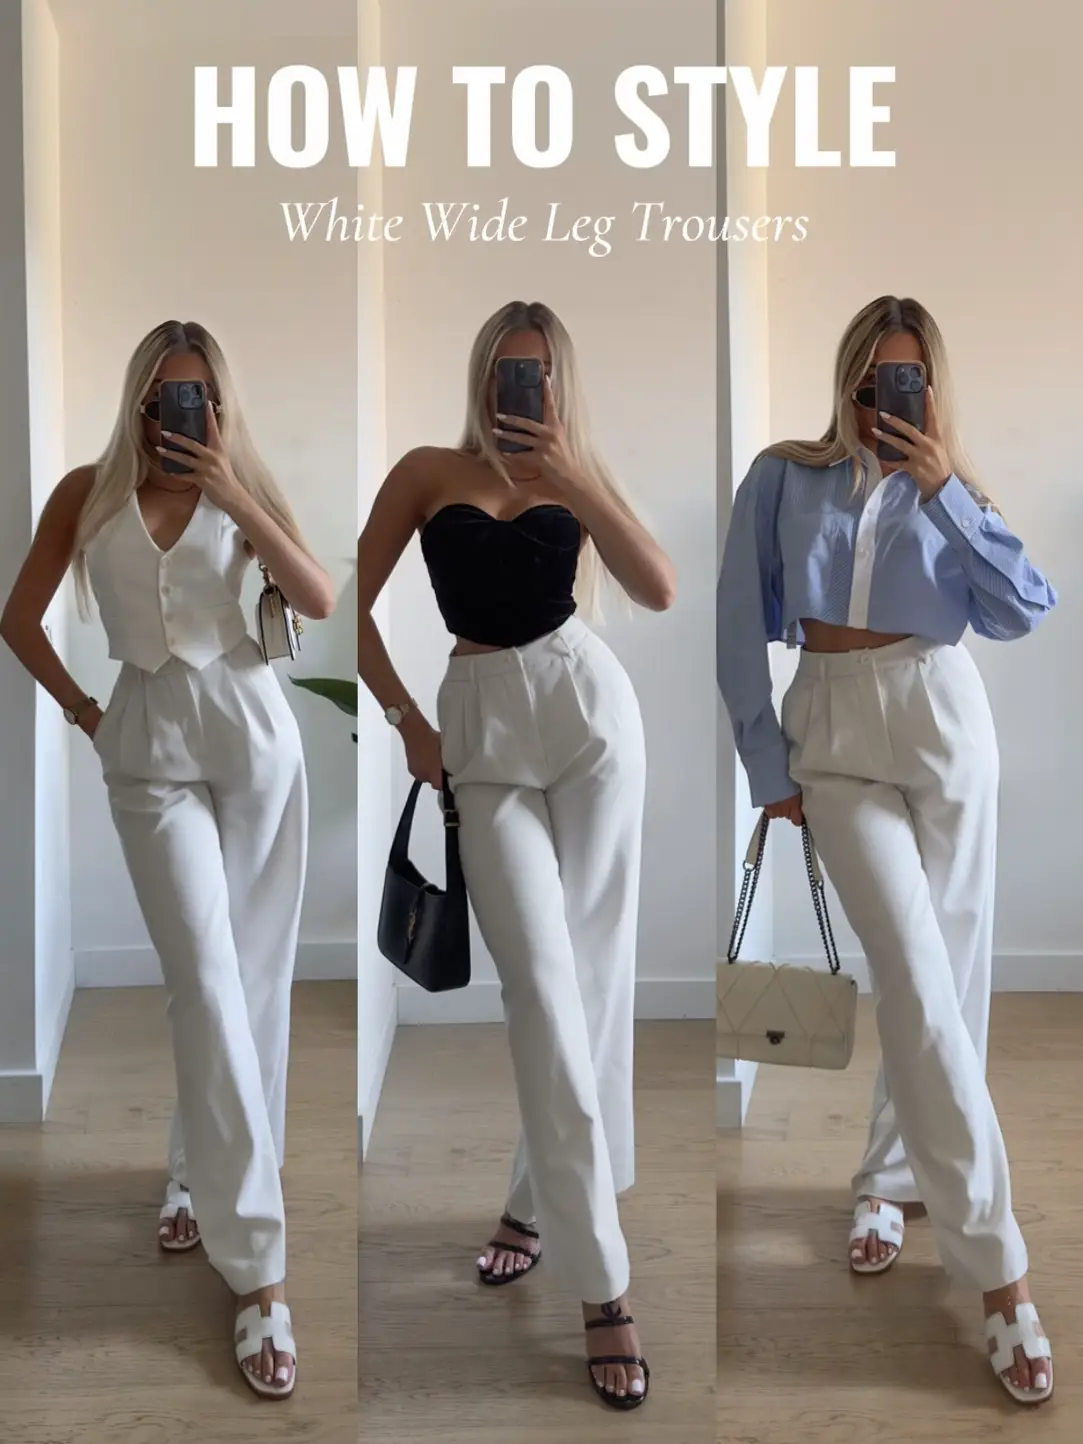 20 top How to Dress Up White Trousers for A Formal Occasion ideas